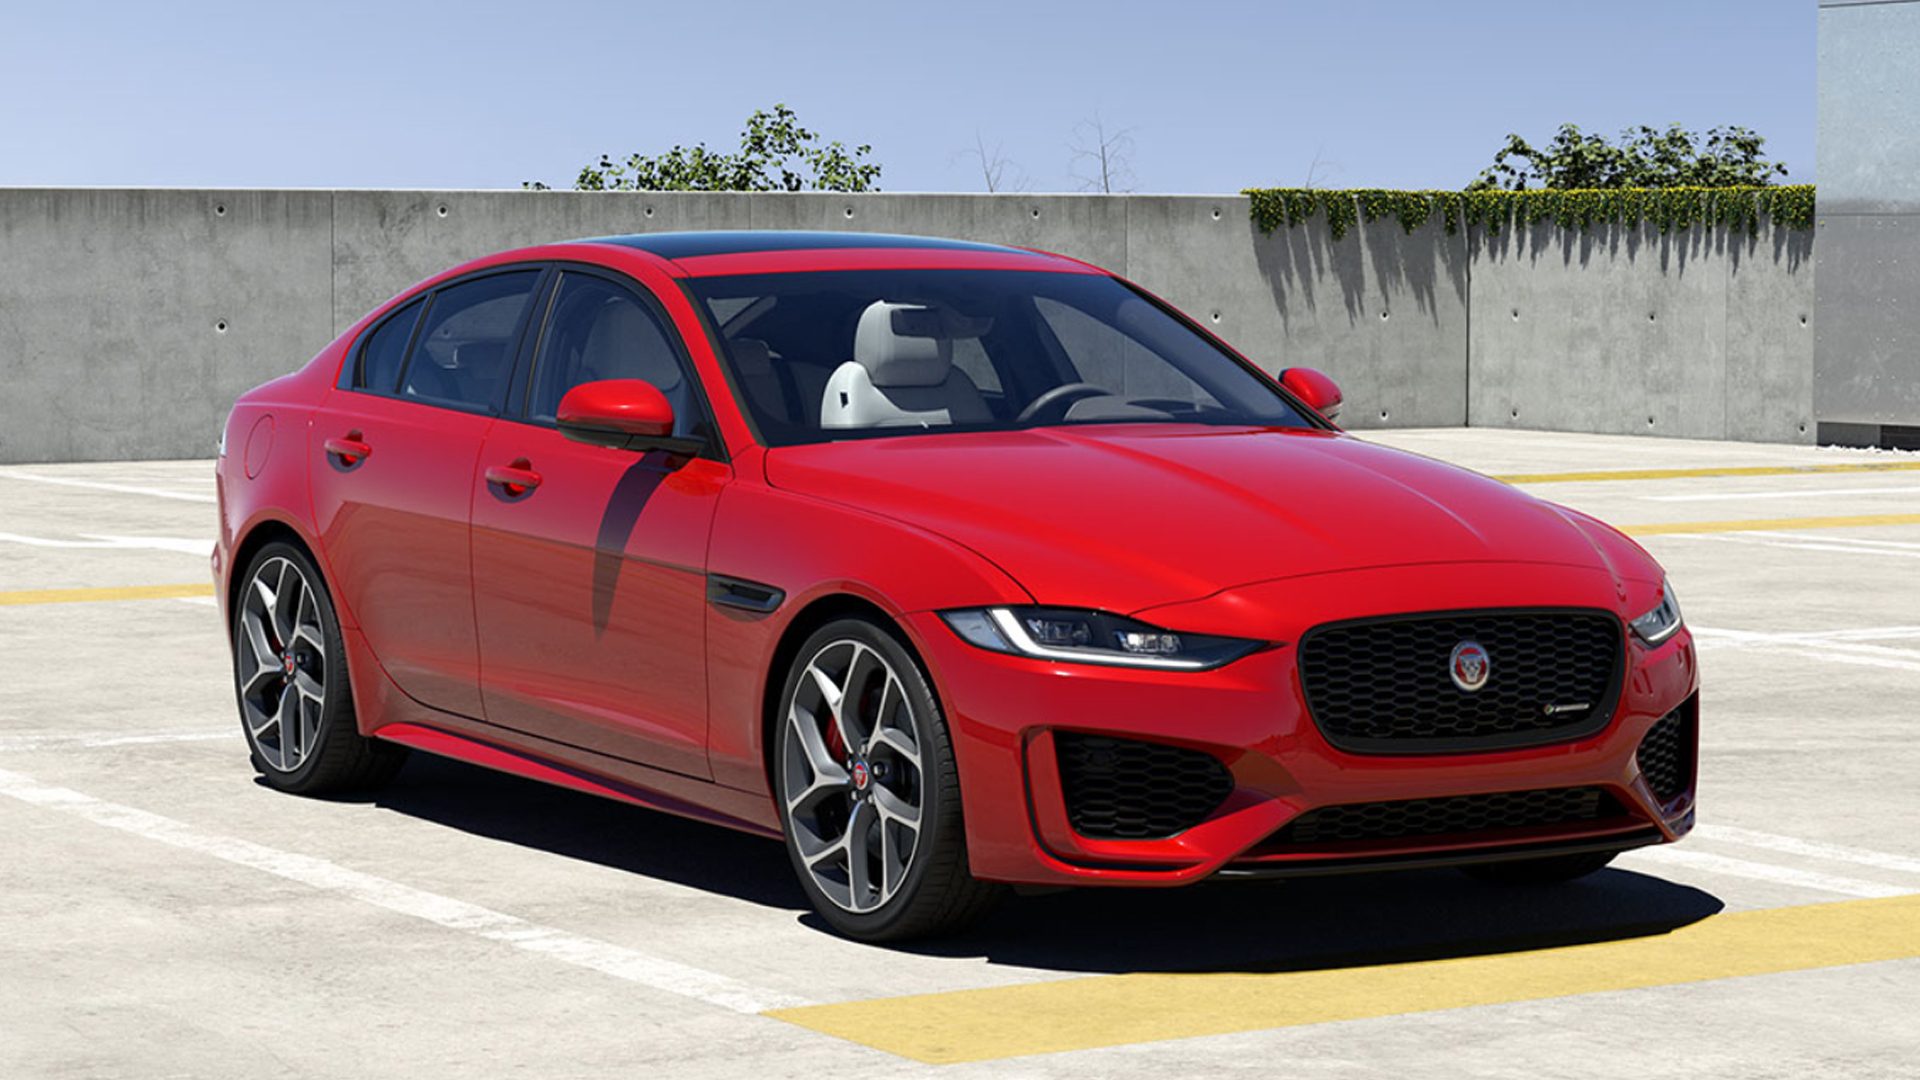 Jaguar Xe 2020 Price Mileage Reviews Specification Gallery